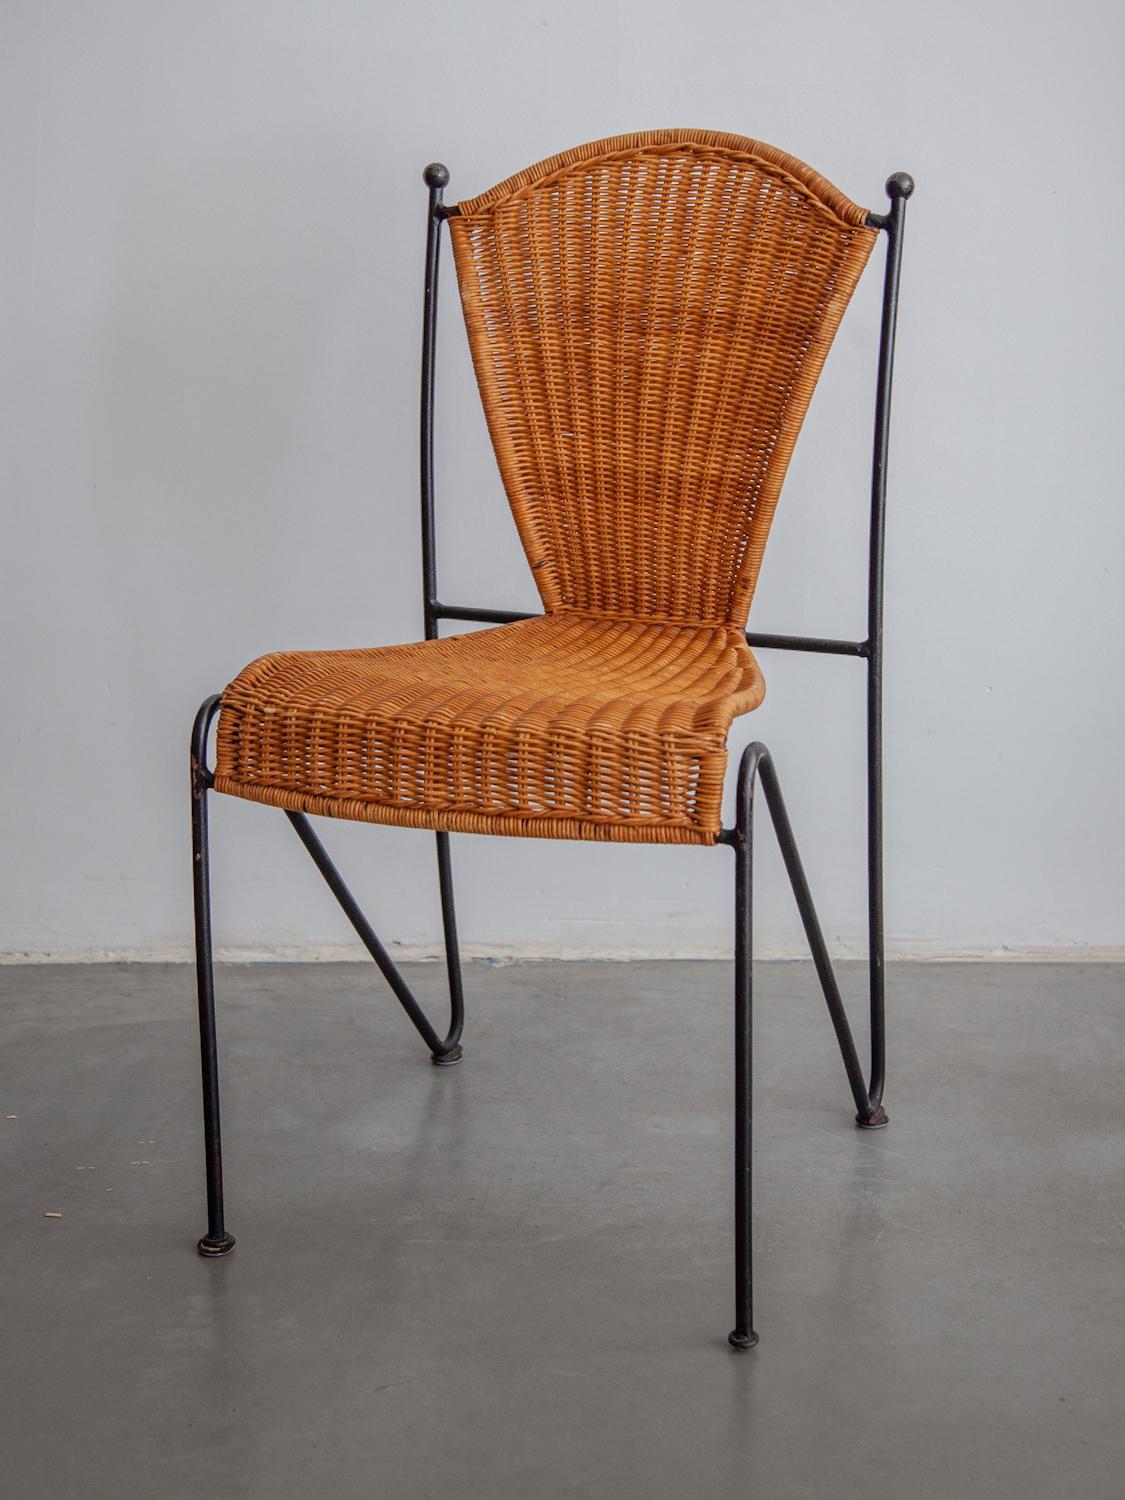 Six Iron and Rattan Indoor and Outdoor Patio Chairs by Pipsan Saarinen Swanson 1